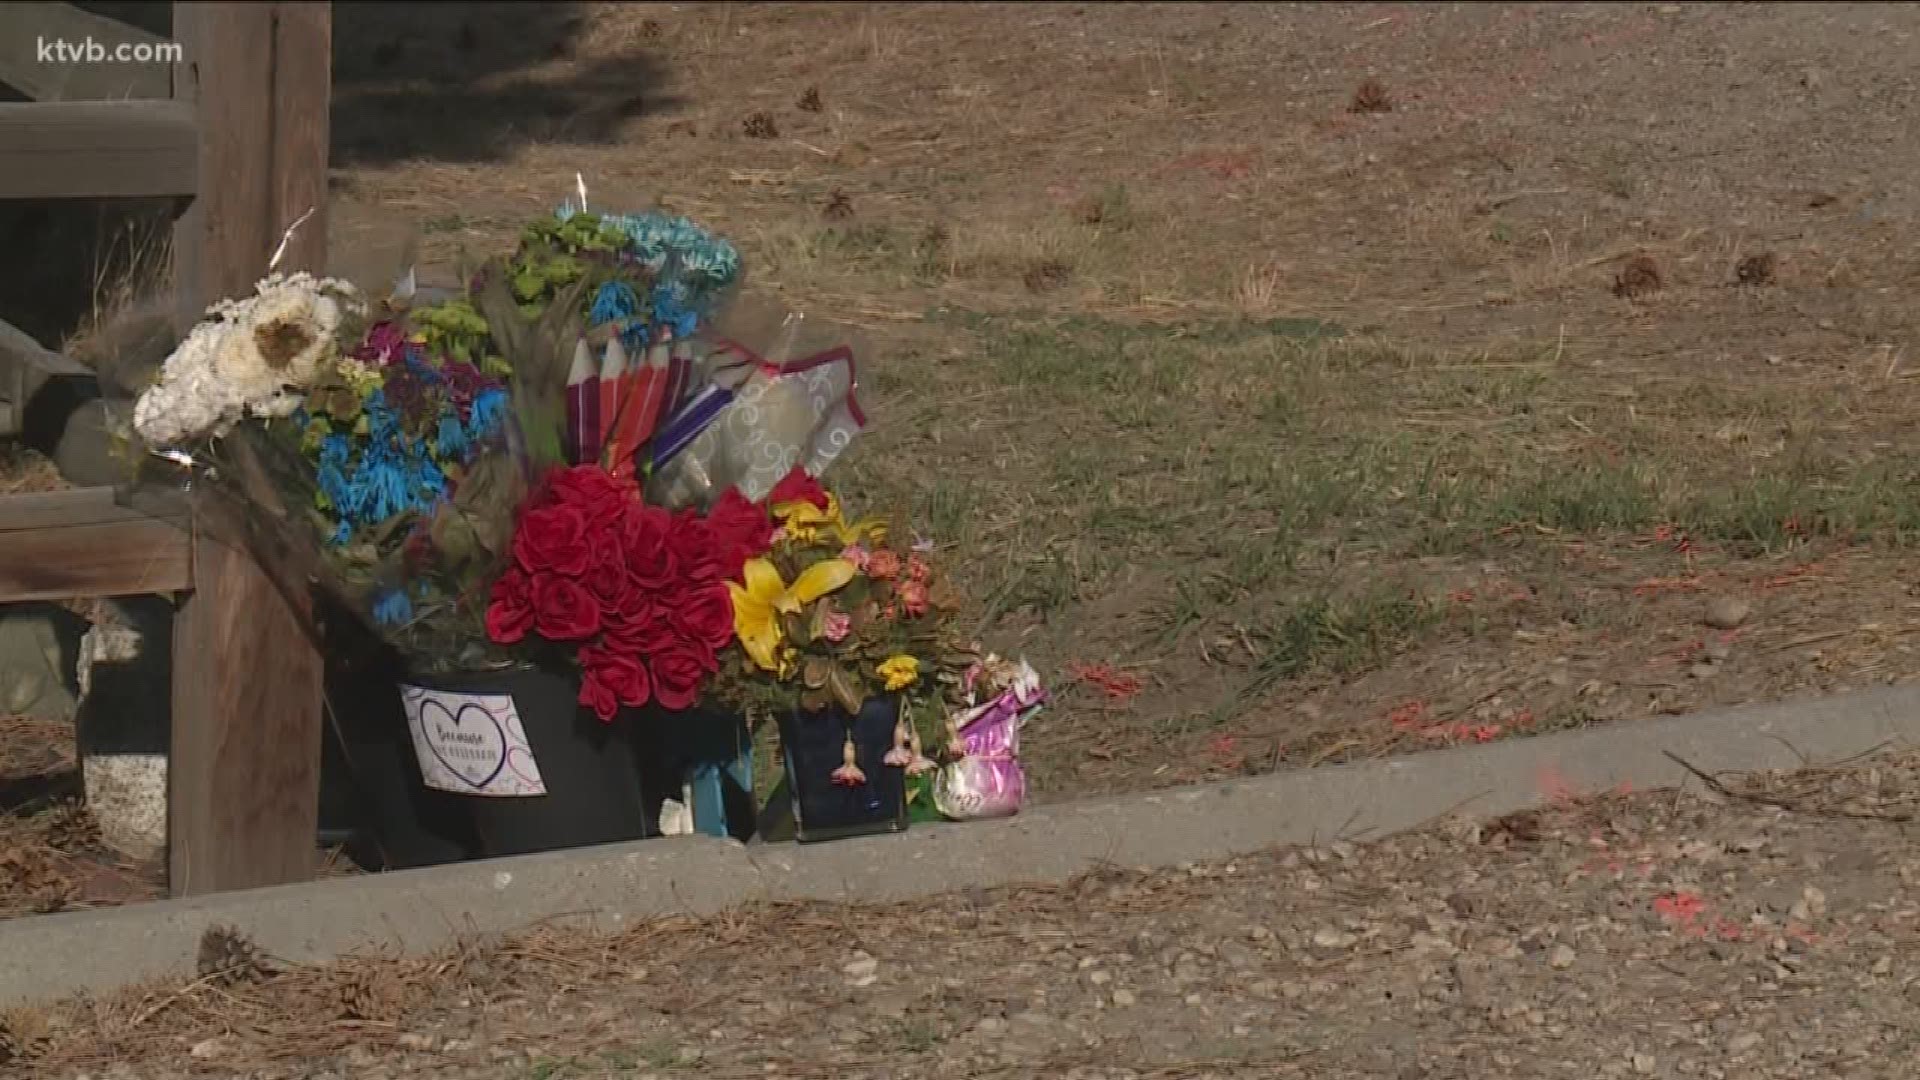 After a 7-year-old boy was hit and killed while riding his bike in Boise last week, community members want to know what's being done to improve safety.